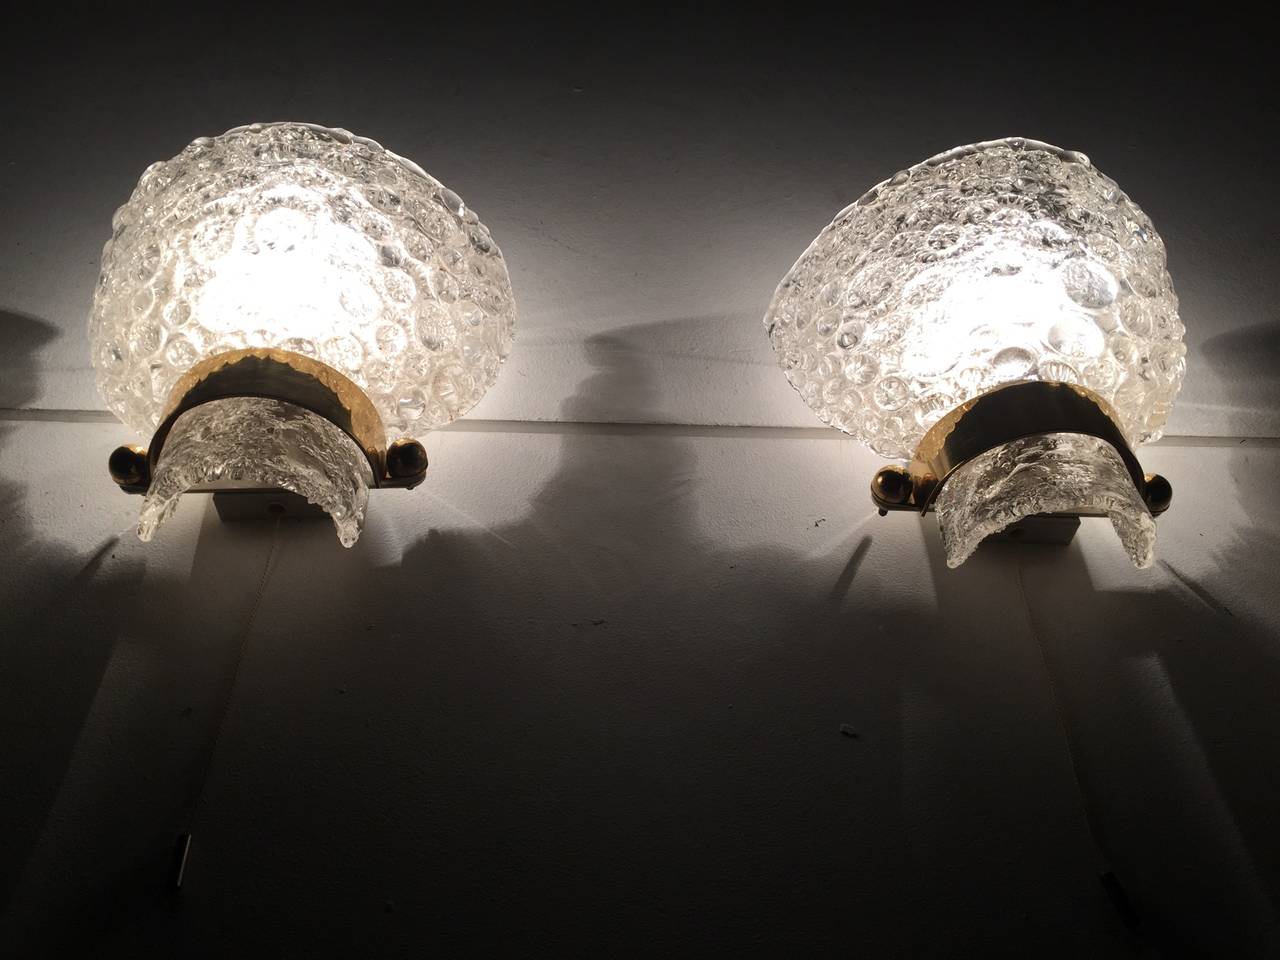 Textured Ice Crystal Glass & Brass Wall Sconces by Kaiser Germany 1960's For Sale 2